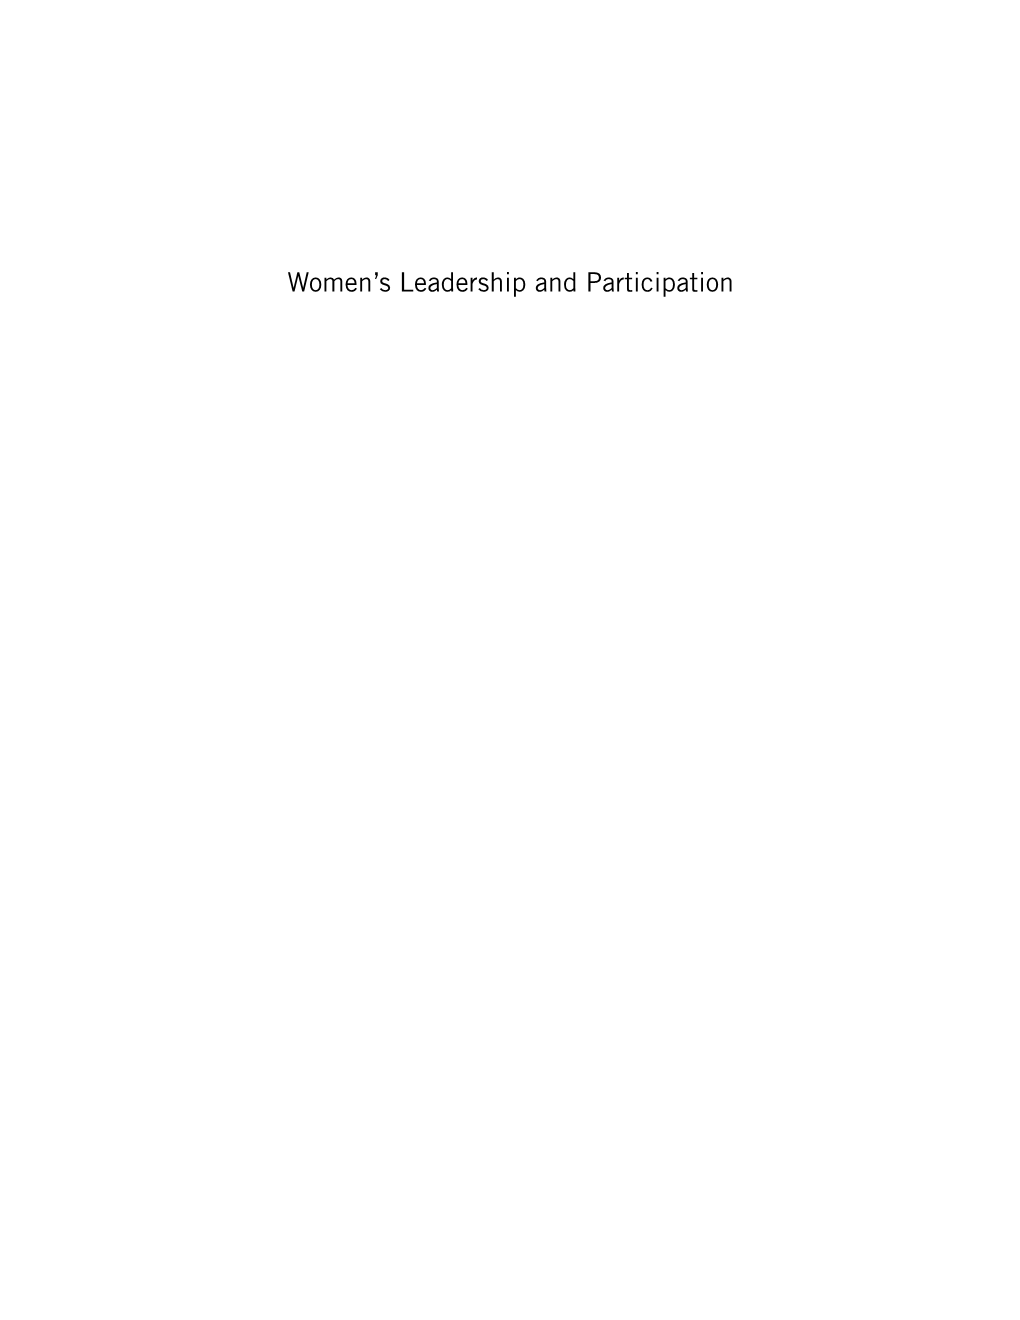 Women's Leadership and Participation: Case Studies On